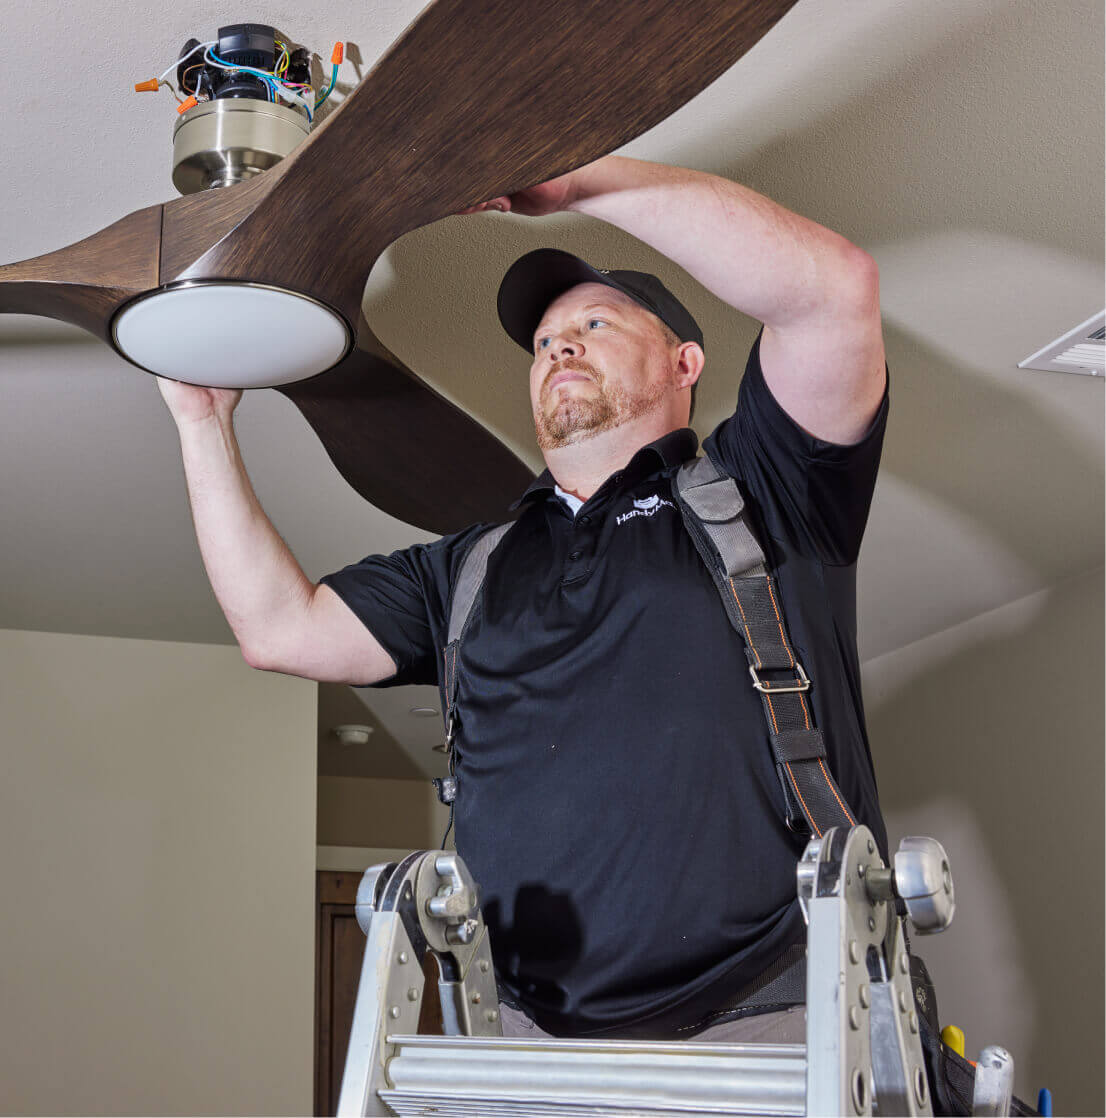 Handyman insurance that’s made for your Nevada business